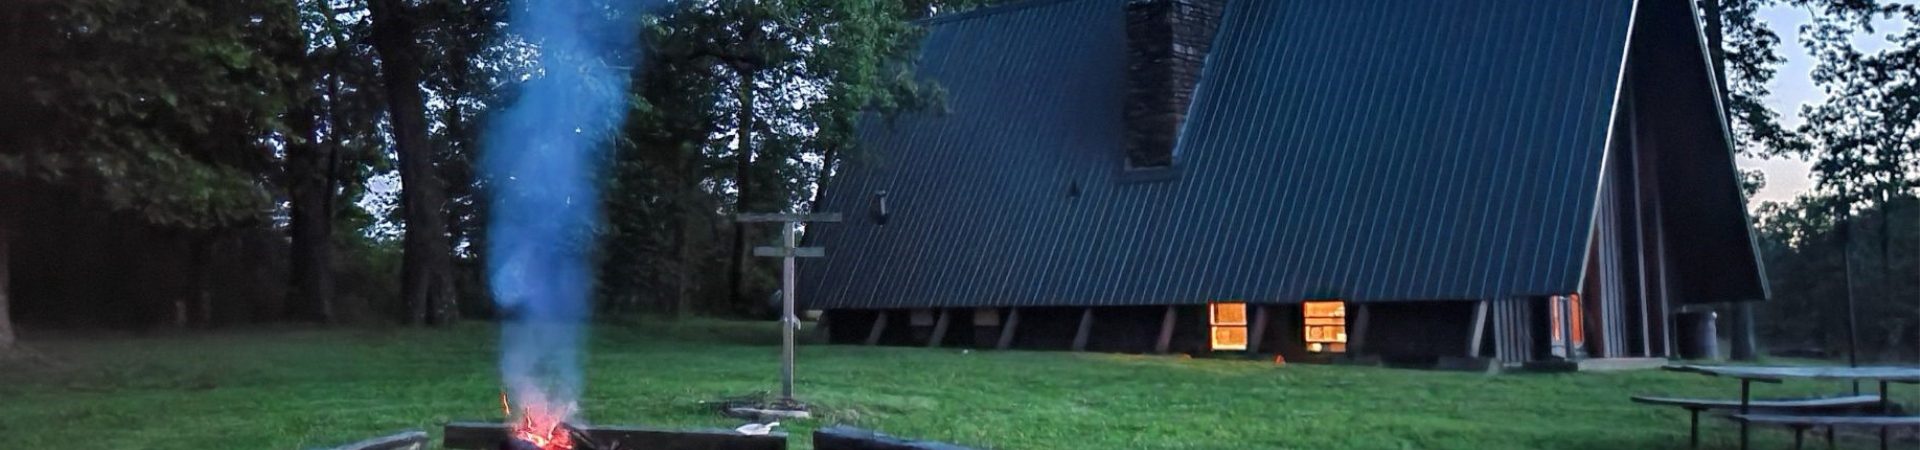  exterior of a frame chalet at dusk with campfire going in fire circle 